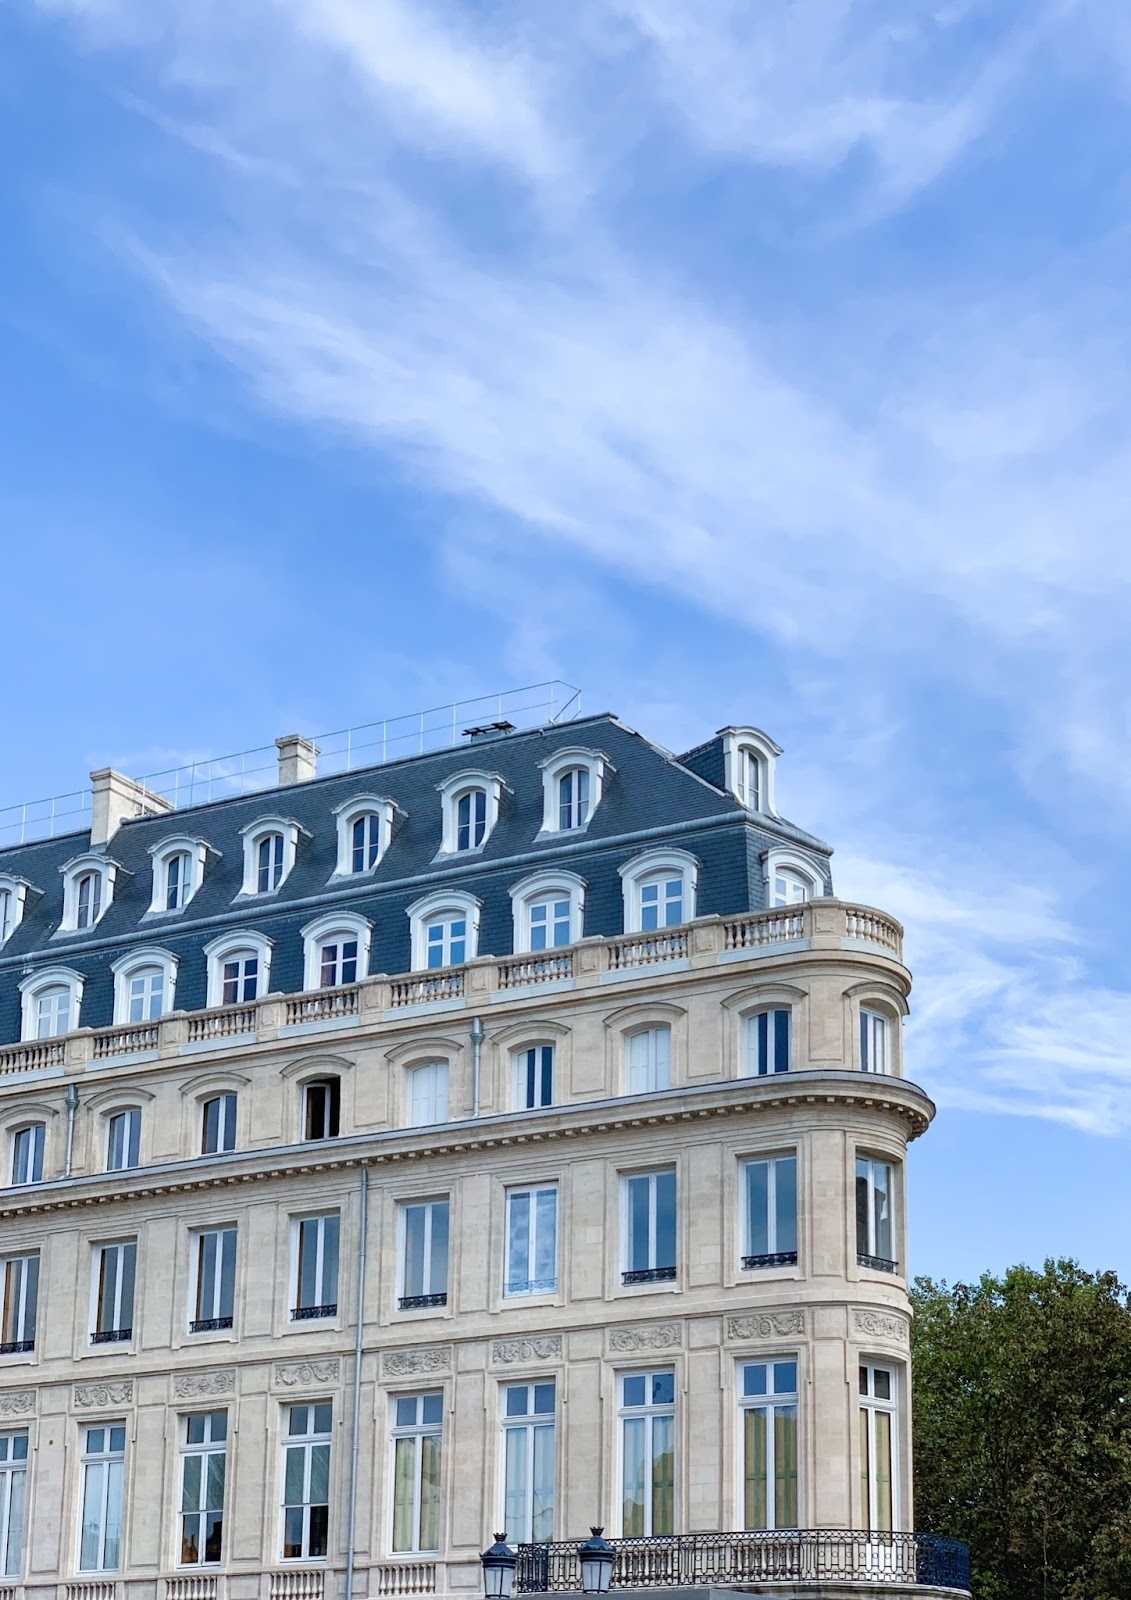 How Can You Recognise a Haussmannian Building?